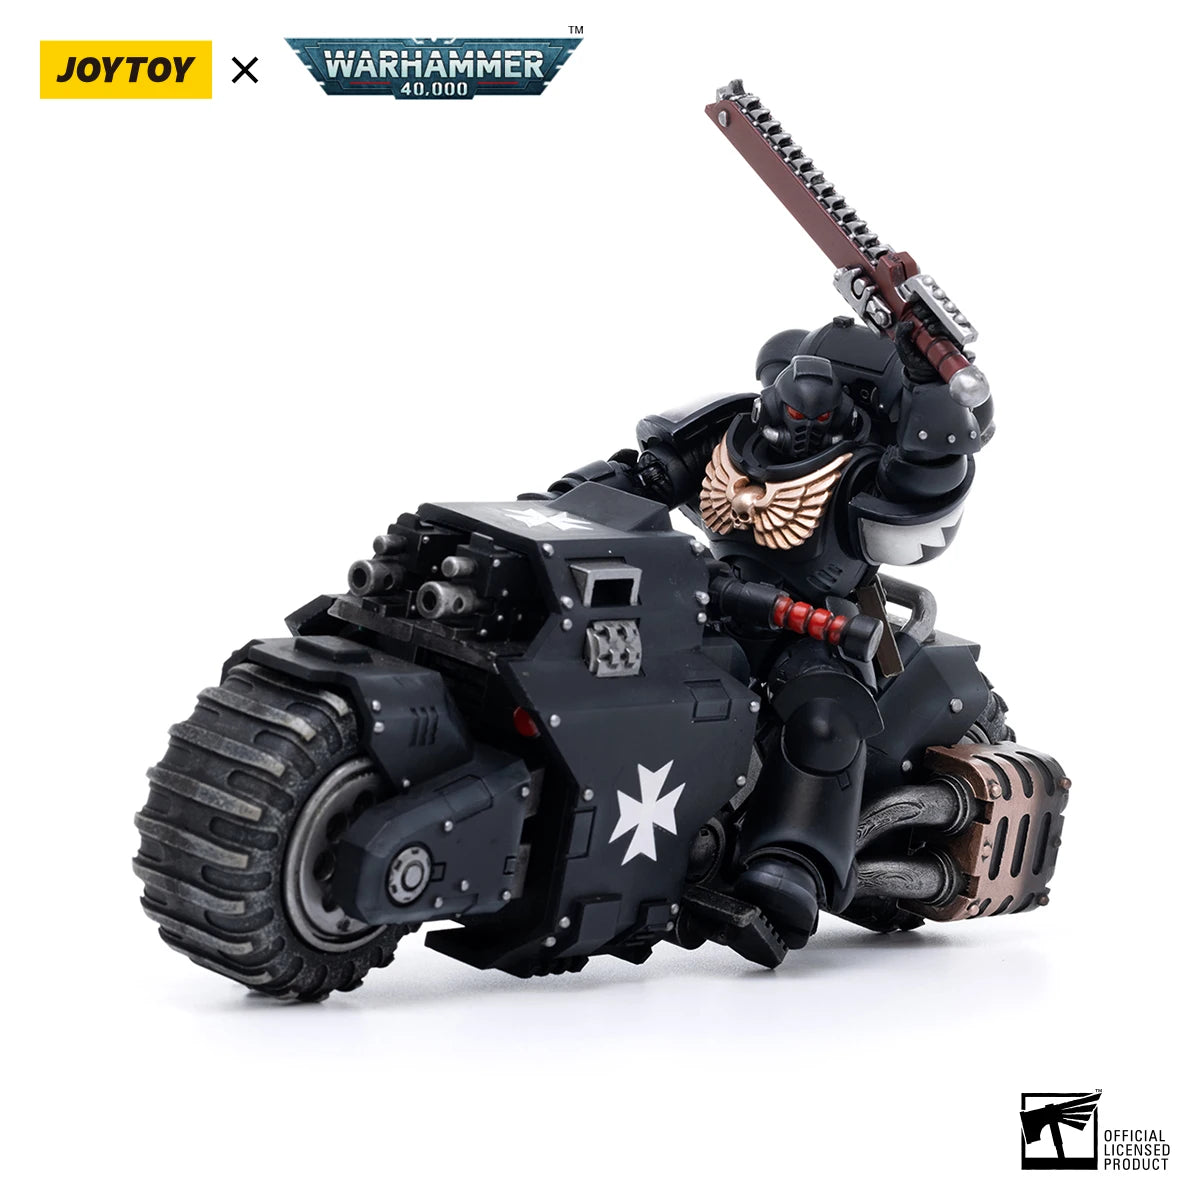 JOYTOY 1/18 figurine Warhammer 40K templiers noirs Outriders Collection Anime modèle militaire